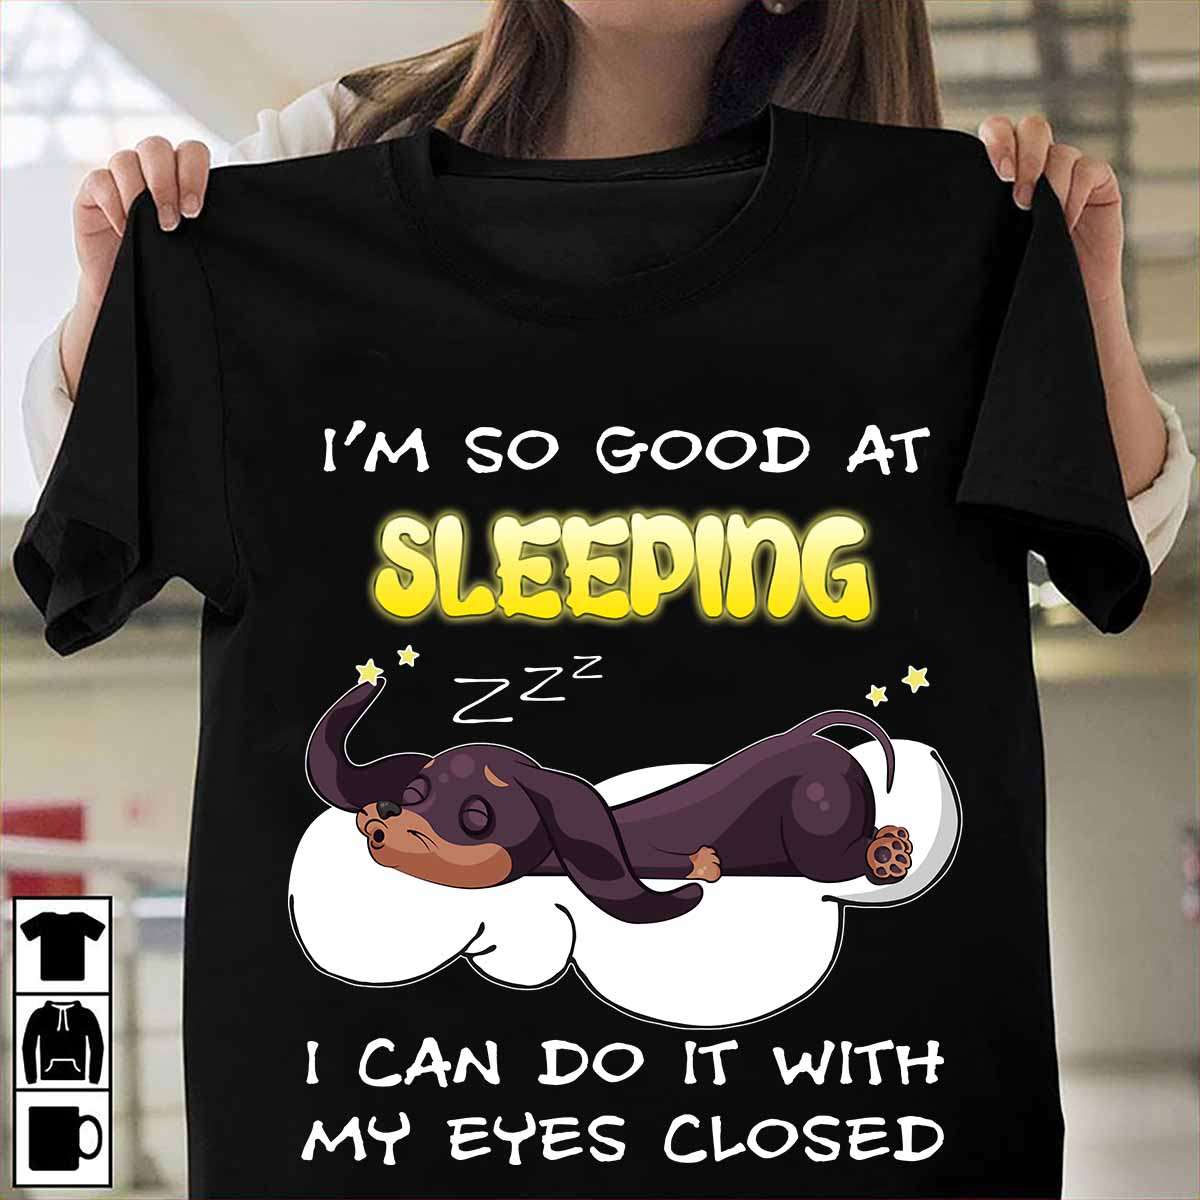 I'm so good at sleeping I can it with my eyes closed - Sleeping Dachshund dog, Dachshund dog lover